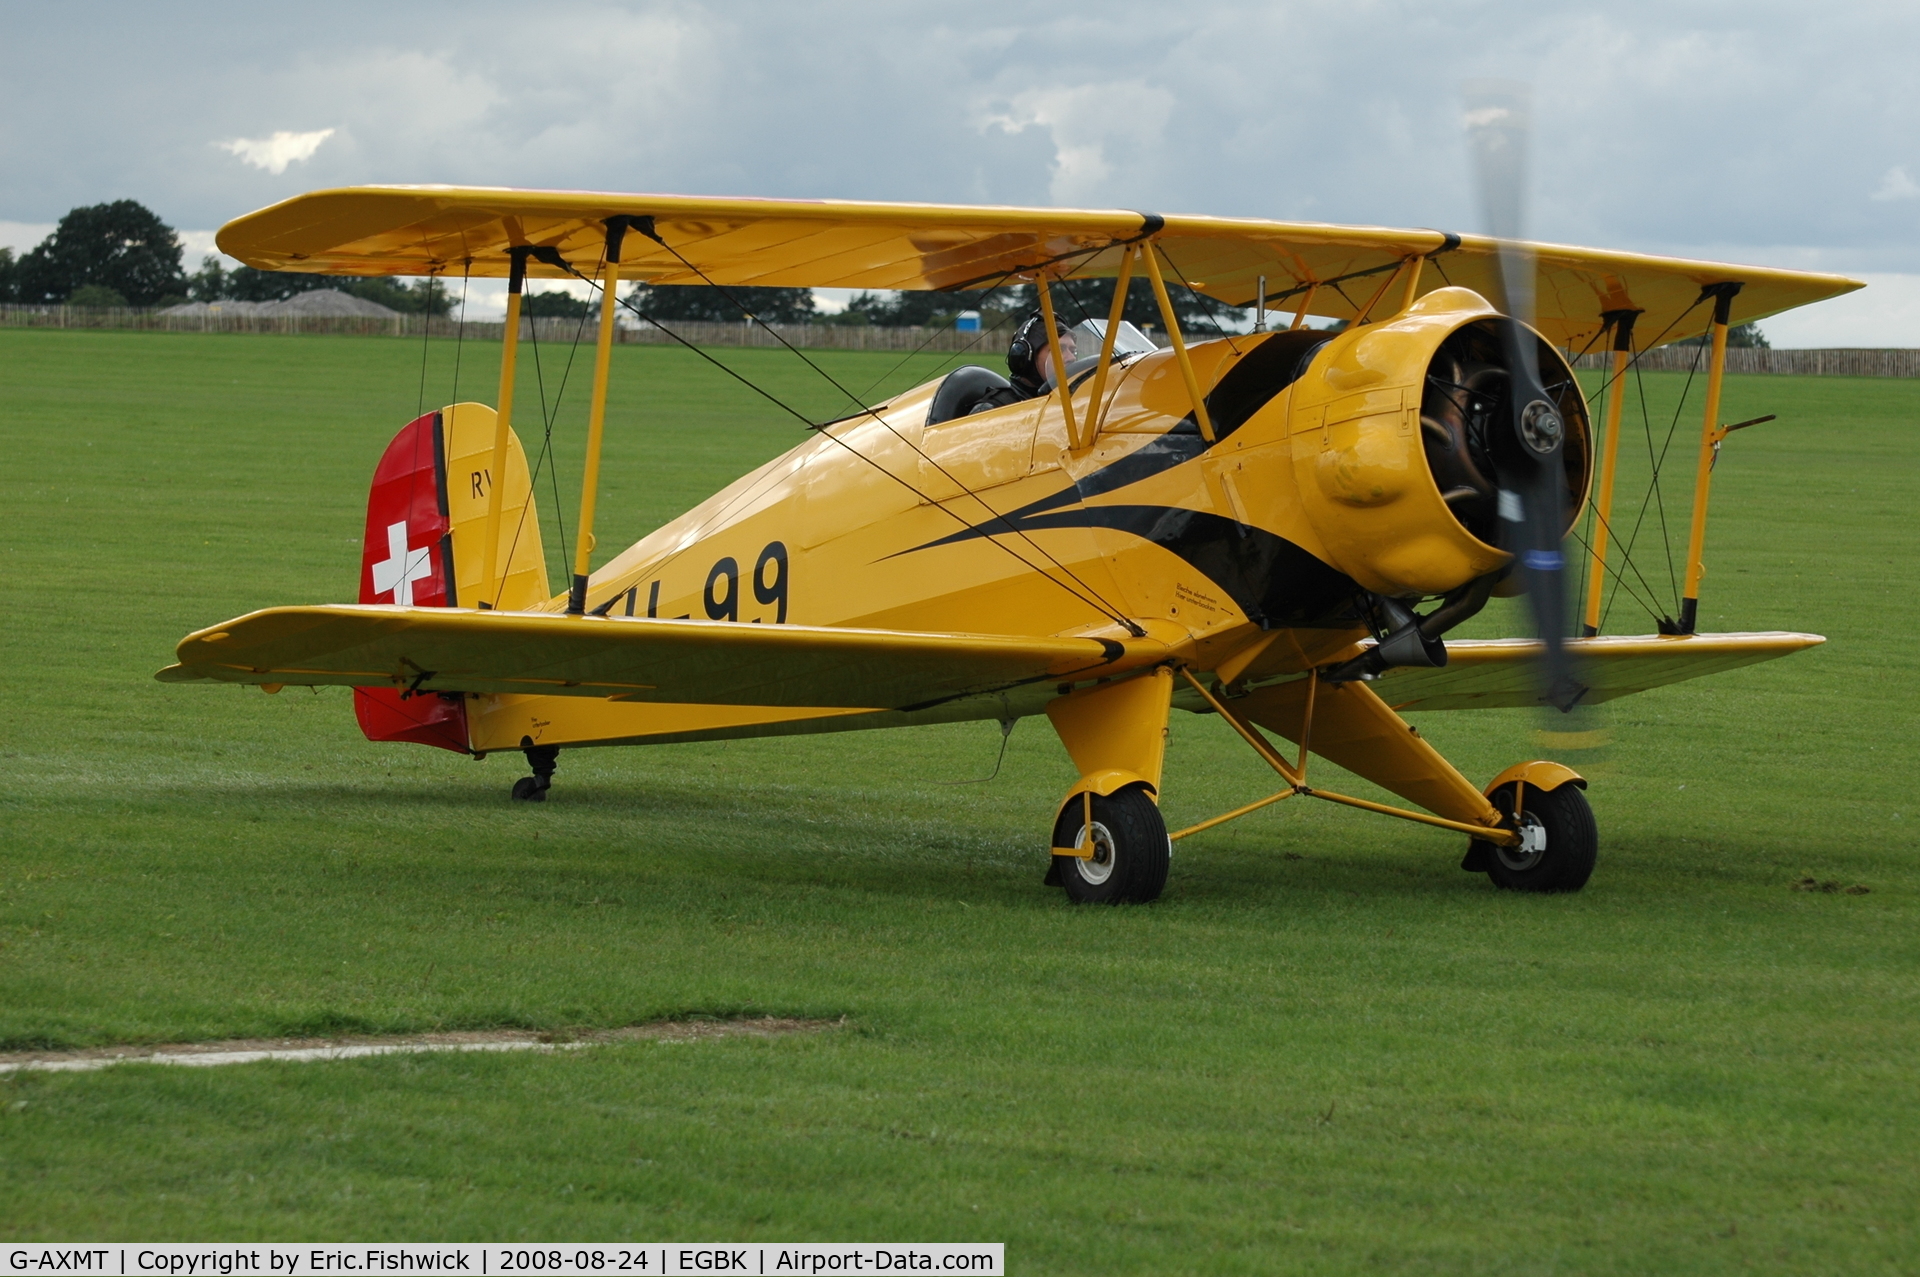 G-AXMT, 1938 Bucker Bu-133C Jungmeister C/N 46, 3. U-99 at the Sywell Airshow 24 Aug 2008